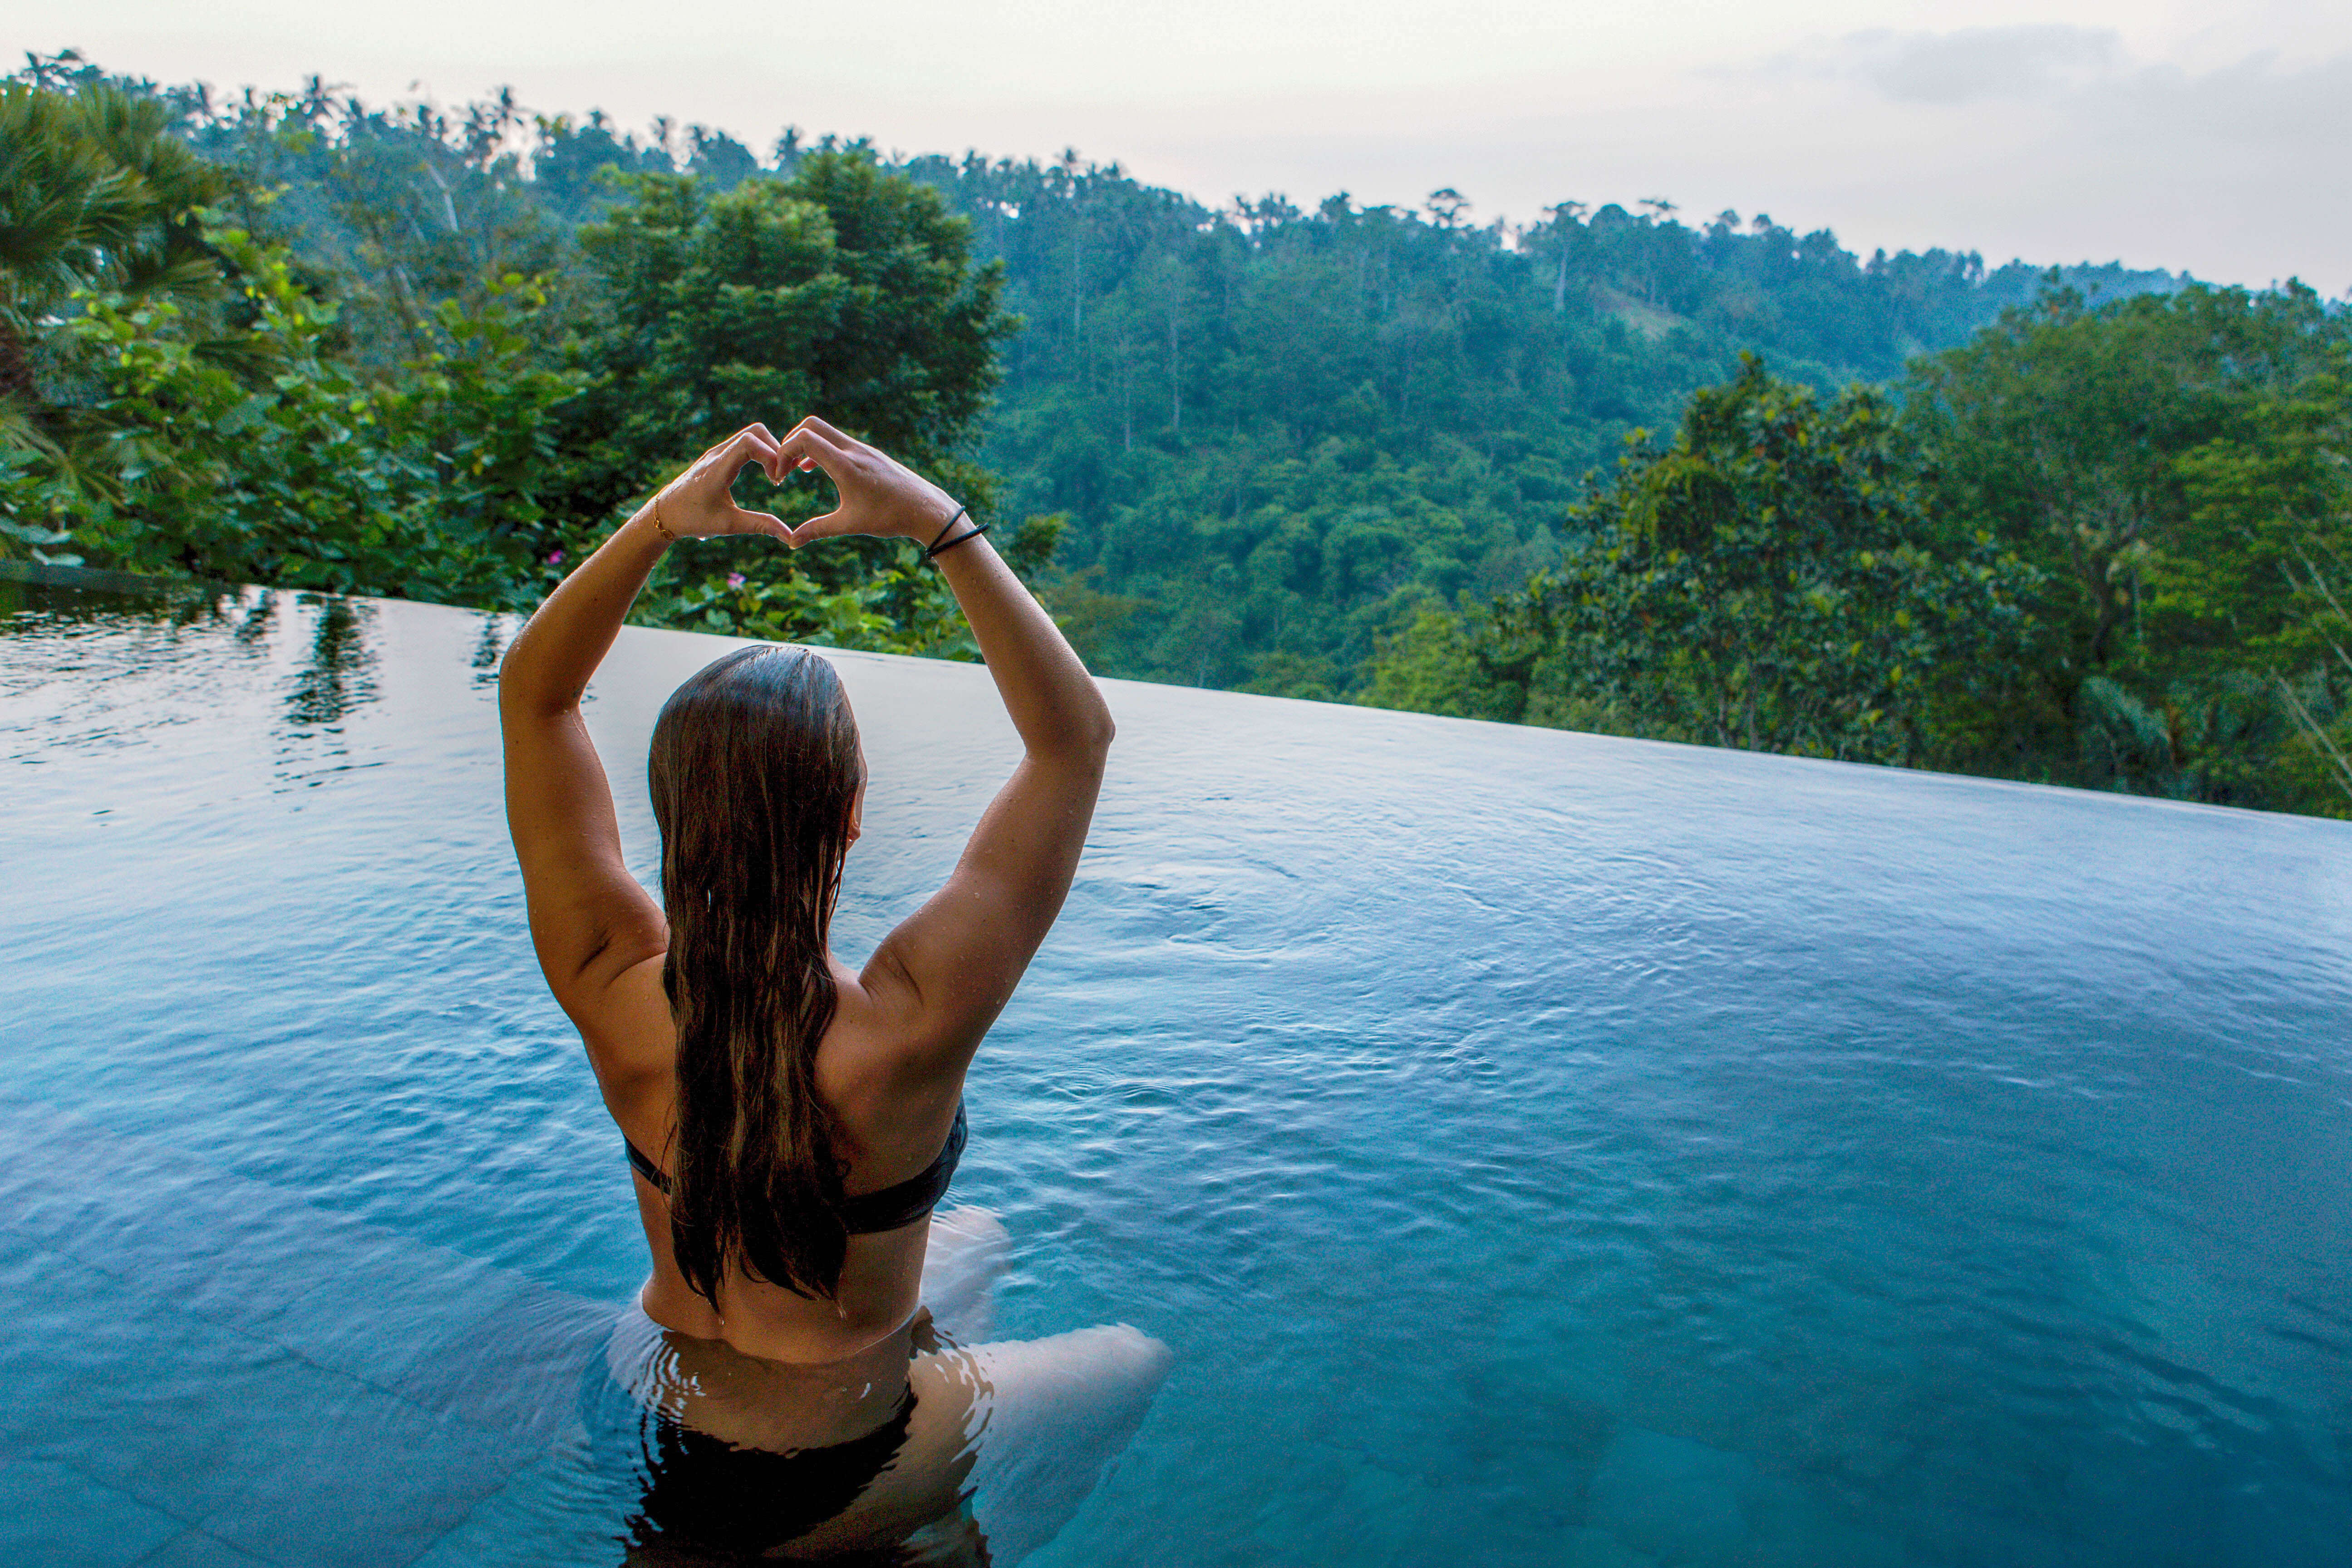 7 Boujee Luxury Yoga Retreats That Are Surprisingly Affordable